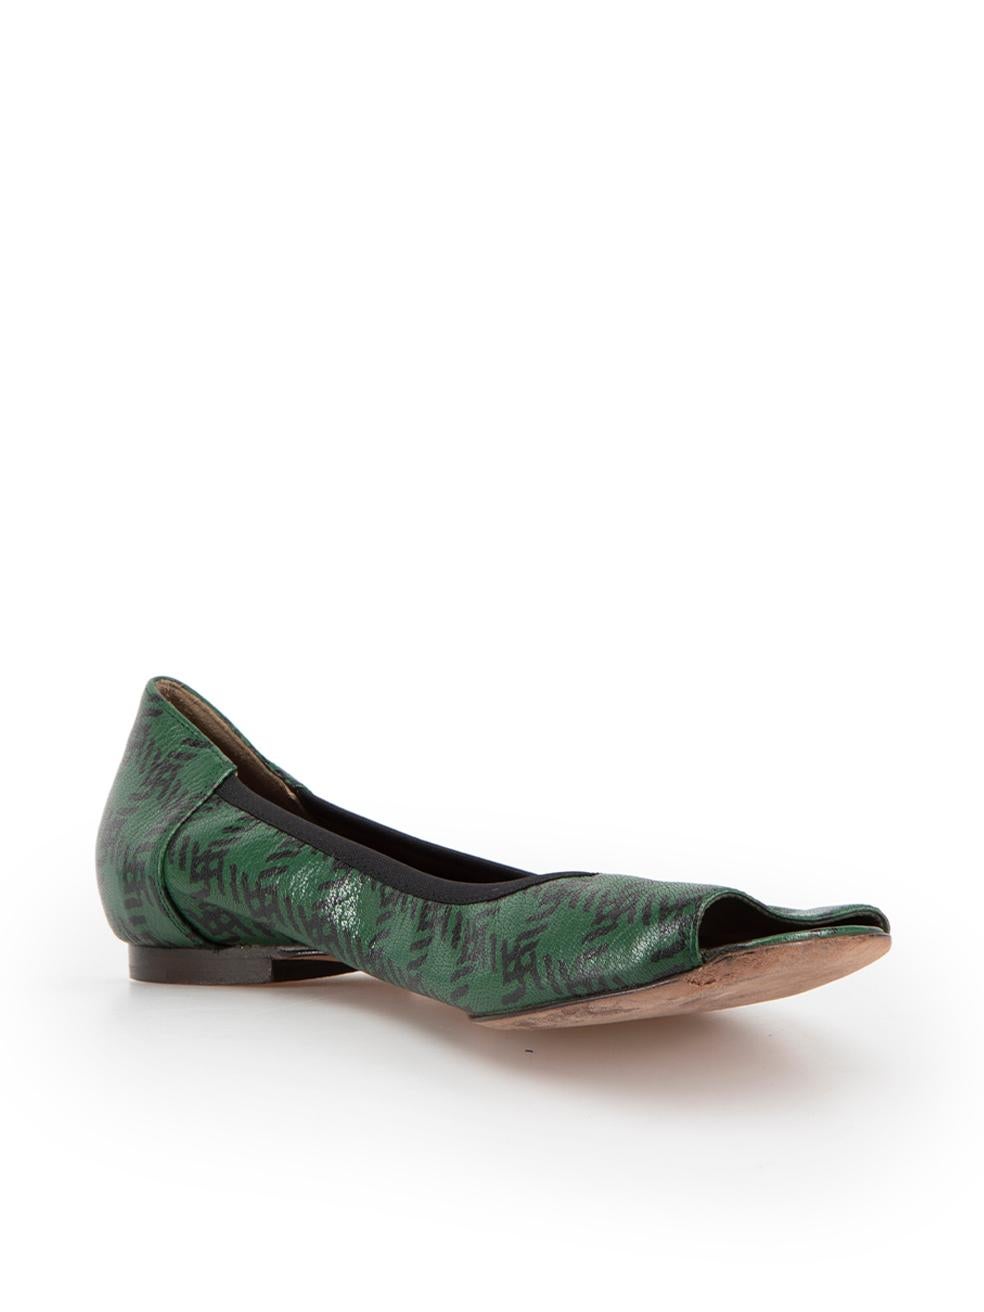 CONDITION is Very good. Minimal wear to shoes is evident. Minimal wear to both shoe soles and footbeds with light marks and abrasions on this used Marni designer resale item. These shoes come with original dust bag.
 
 Details
 Green
 Leather
